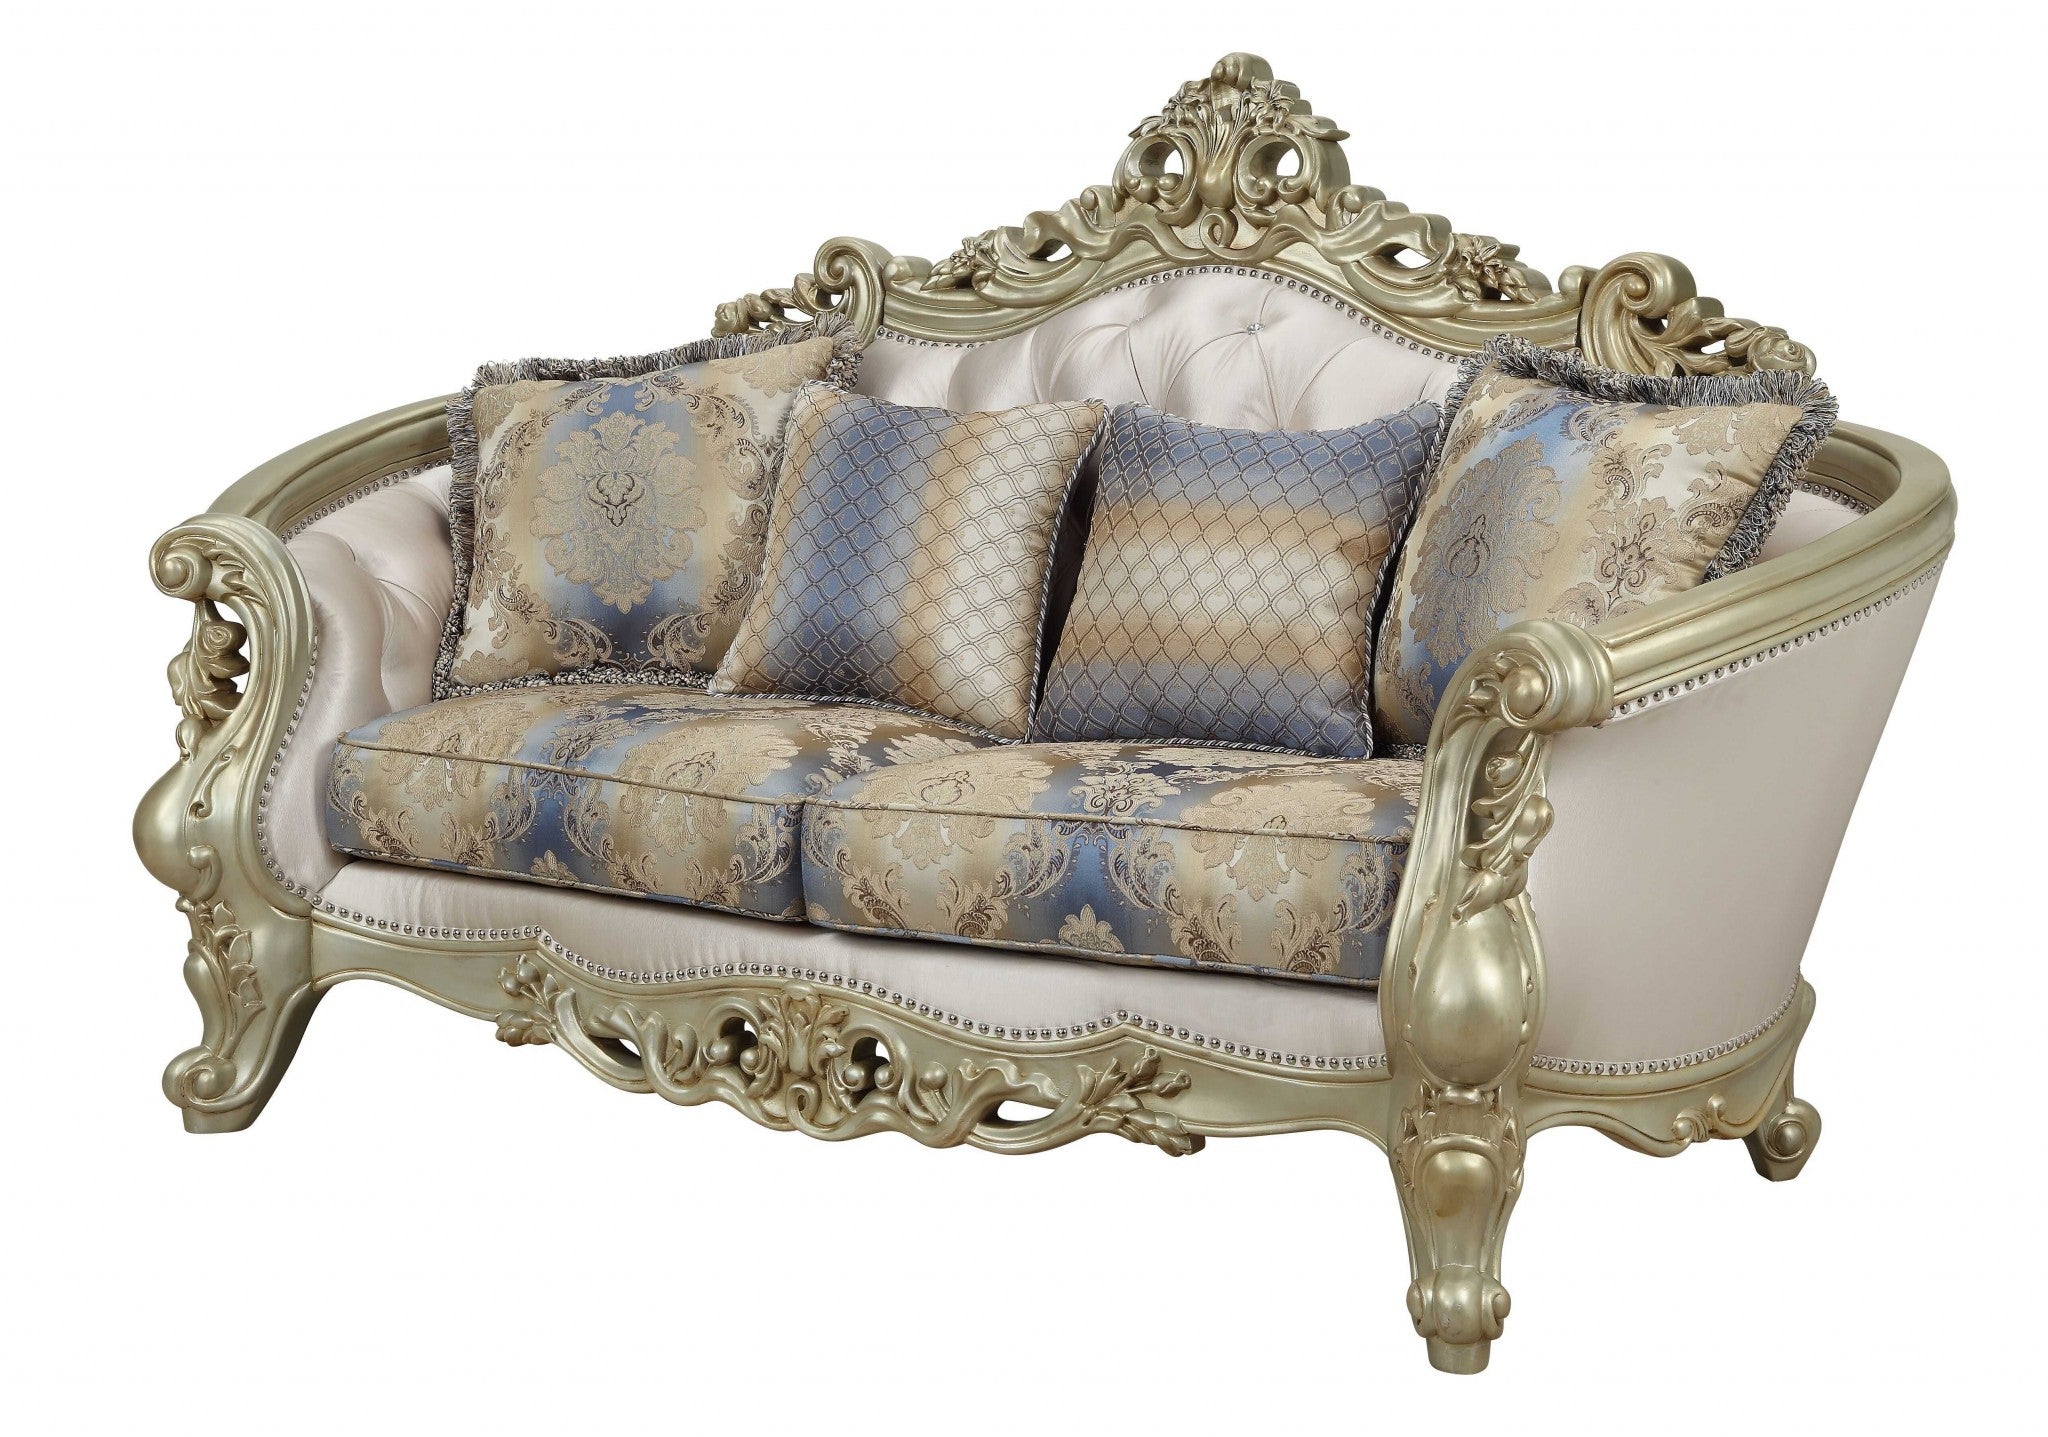 78" Gold Polyester Blend Floral Loveseat and Toss Pillows